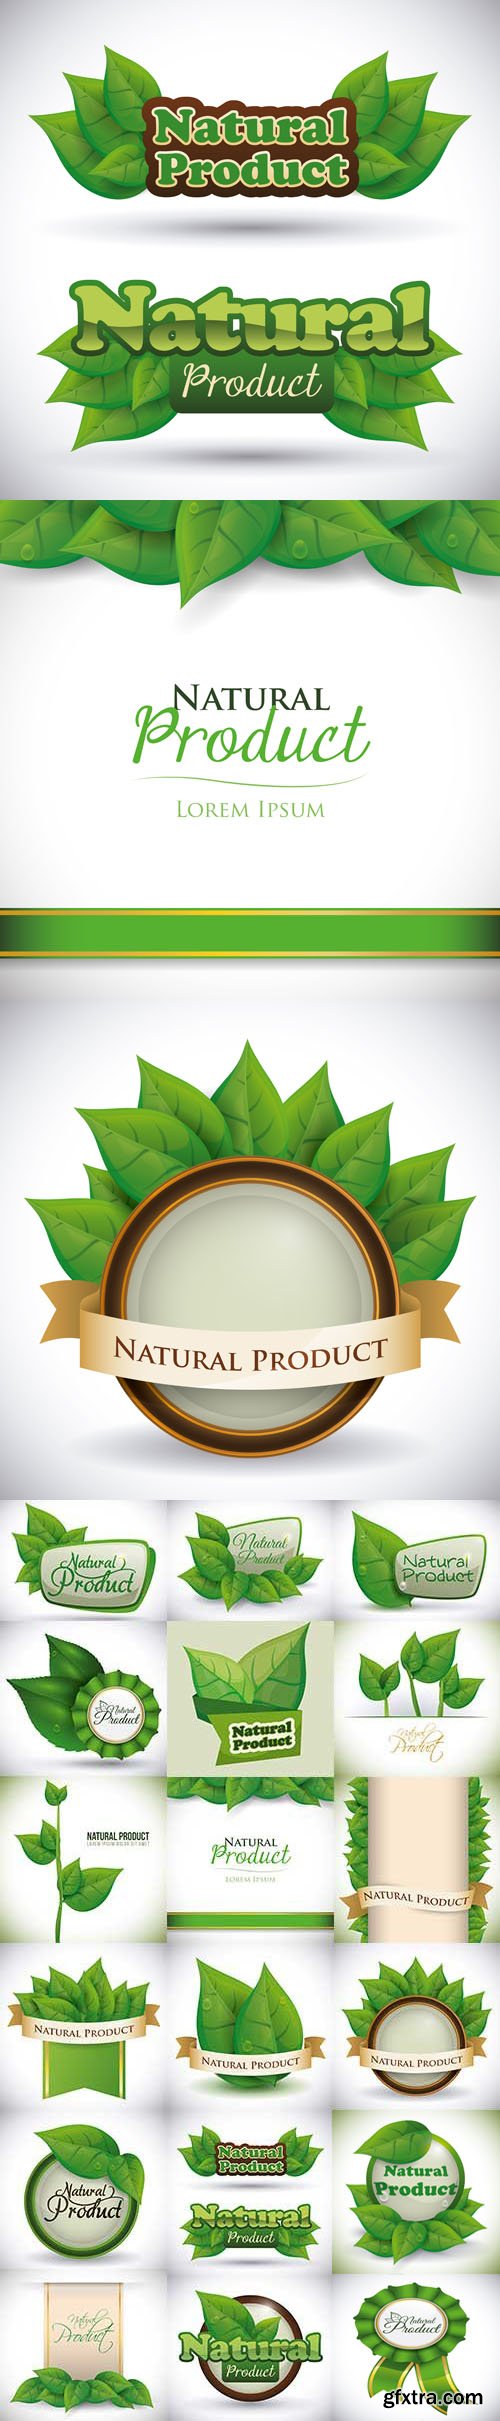 Natural Product Icons in Vector